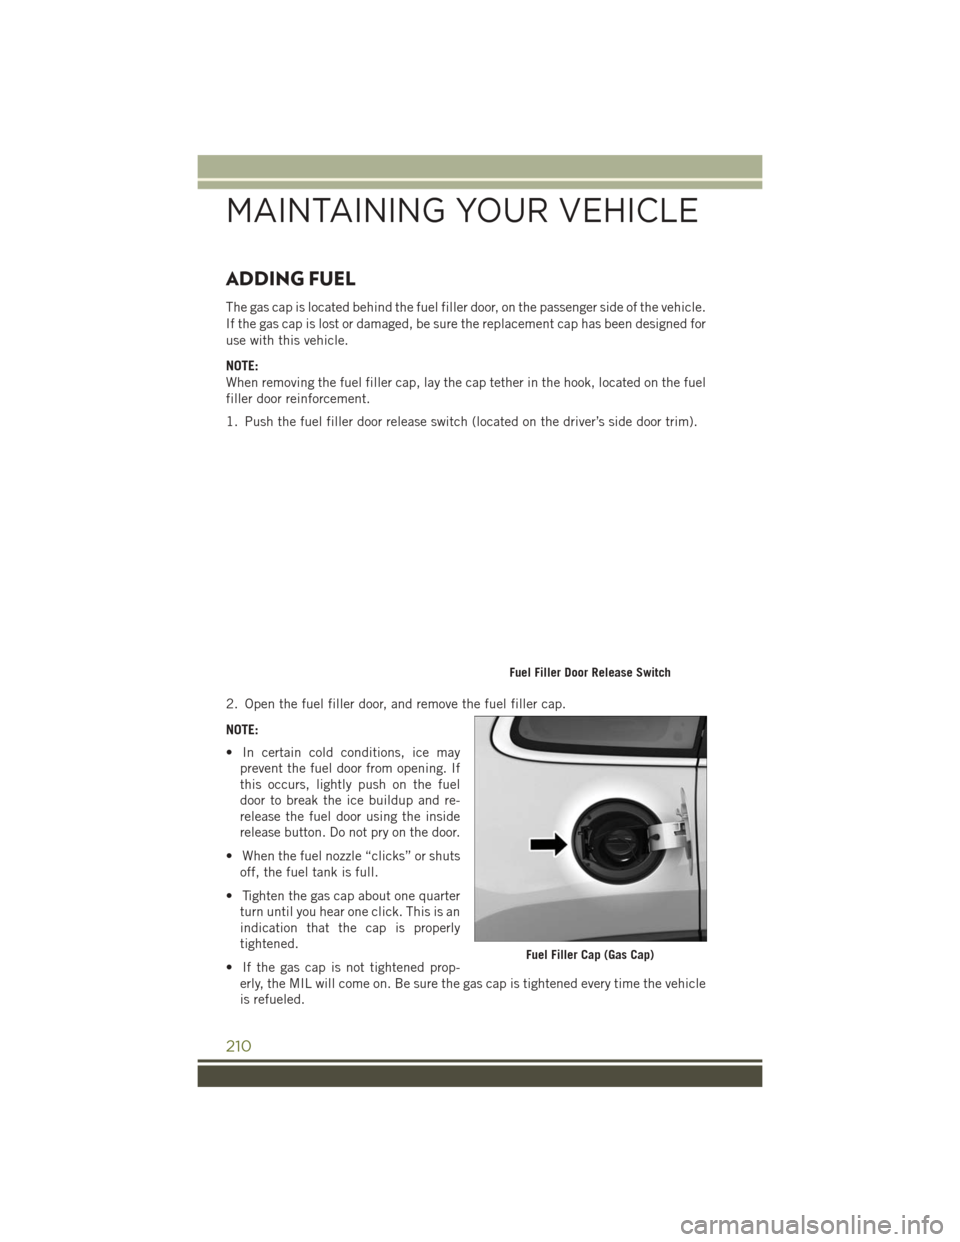 JEEP CHEROKEE 2016 KL / 5.G User Guide ADDING FUEL
The gas cap is located behind the fuel filler door, on the passenger side of the vehicle.
If the gas cap is lost or damaged, be sure the replacement cap has been designed for
use with this